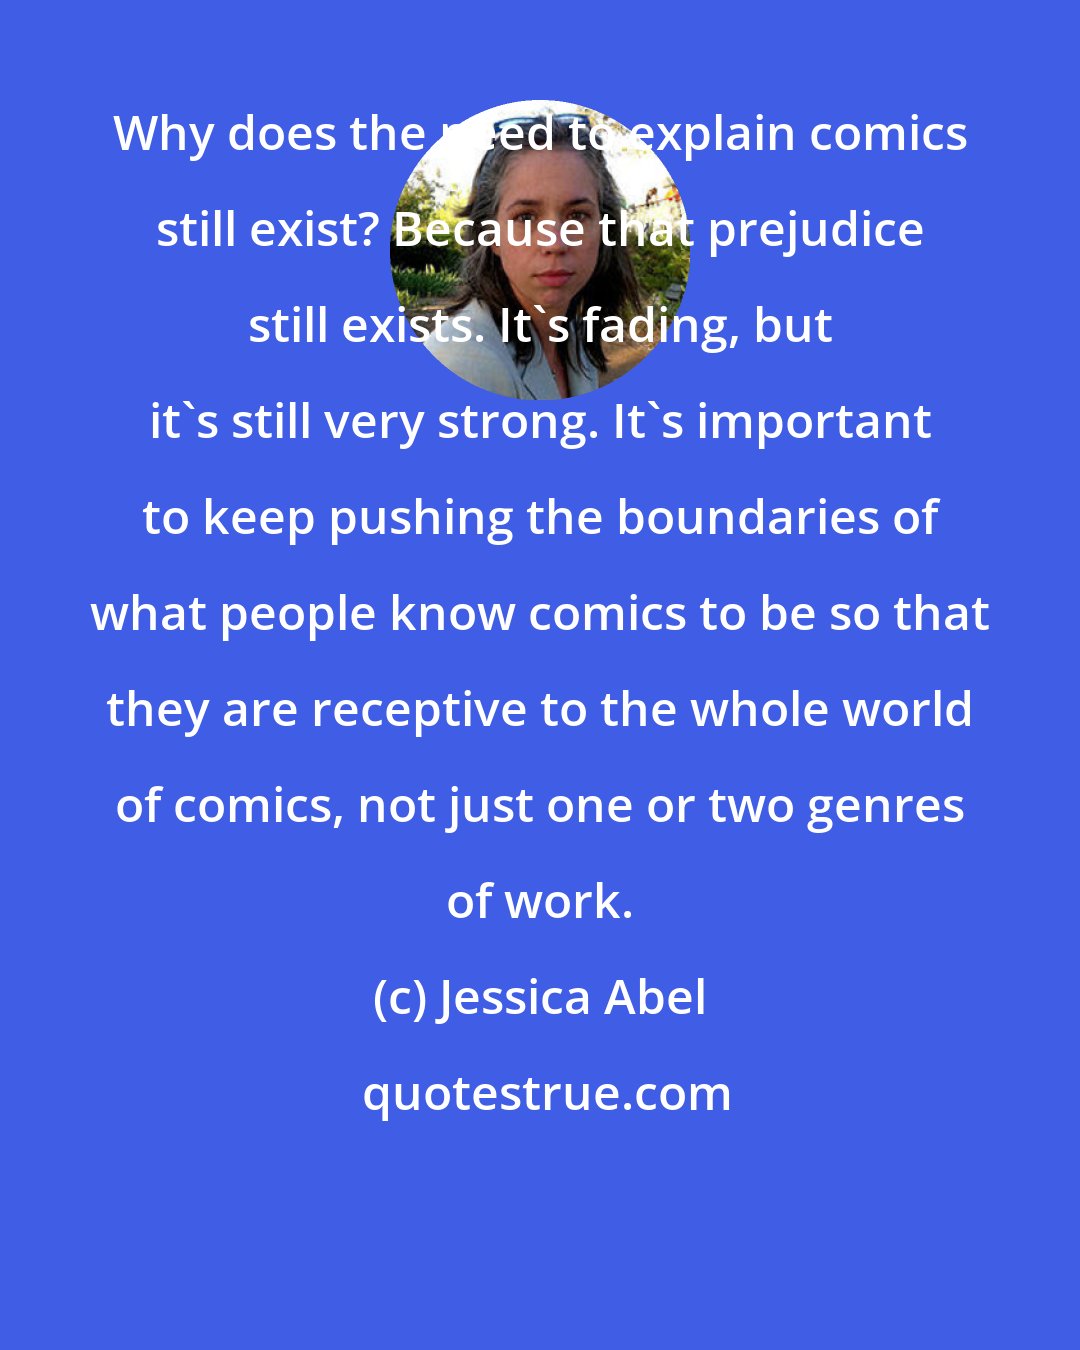 Jessica Abel: Why does the need to explain comics still exist? Because that prejudice still exists. It's fading, but it's still very strong. It's important to keep pushing the boundaries of what people know comics to be so that they are receptive to the whole world of comics, not just one or two genres of work.